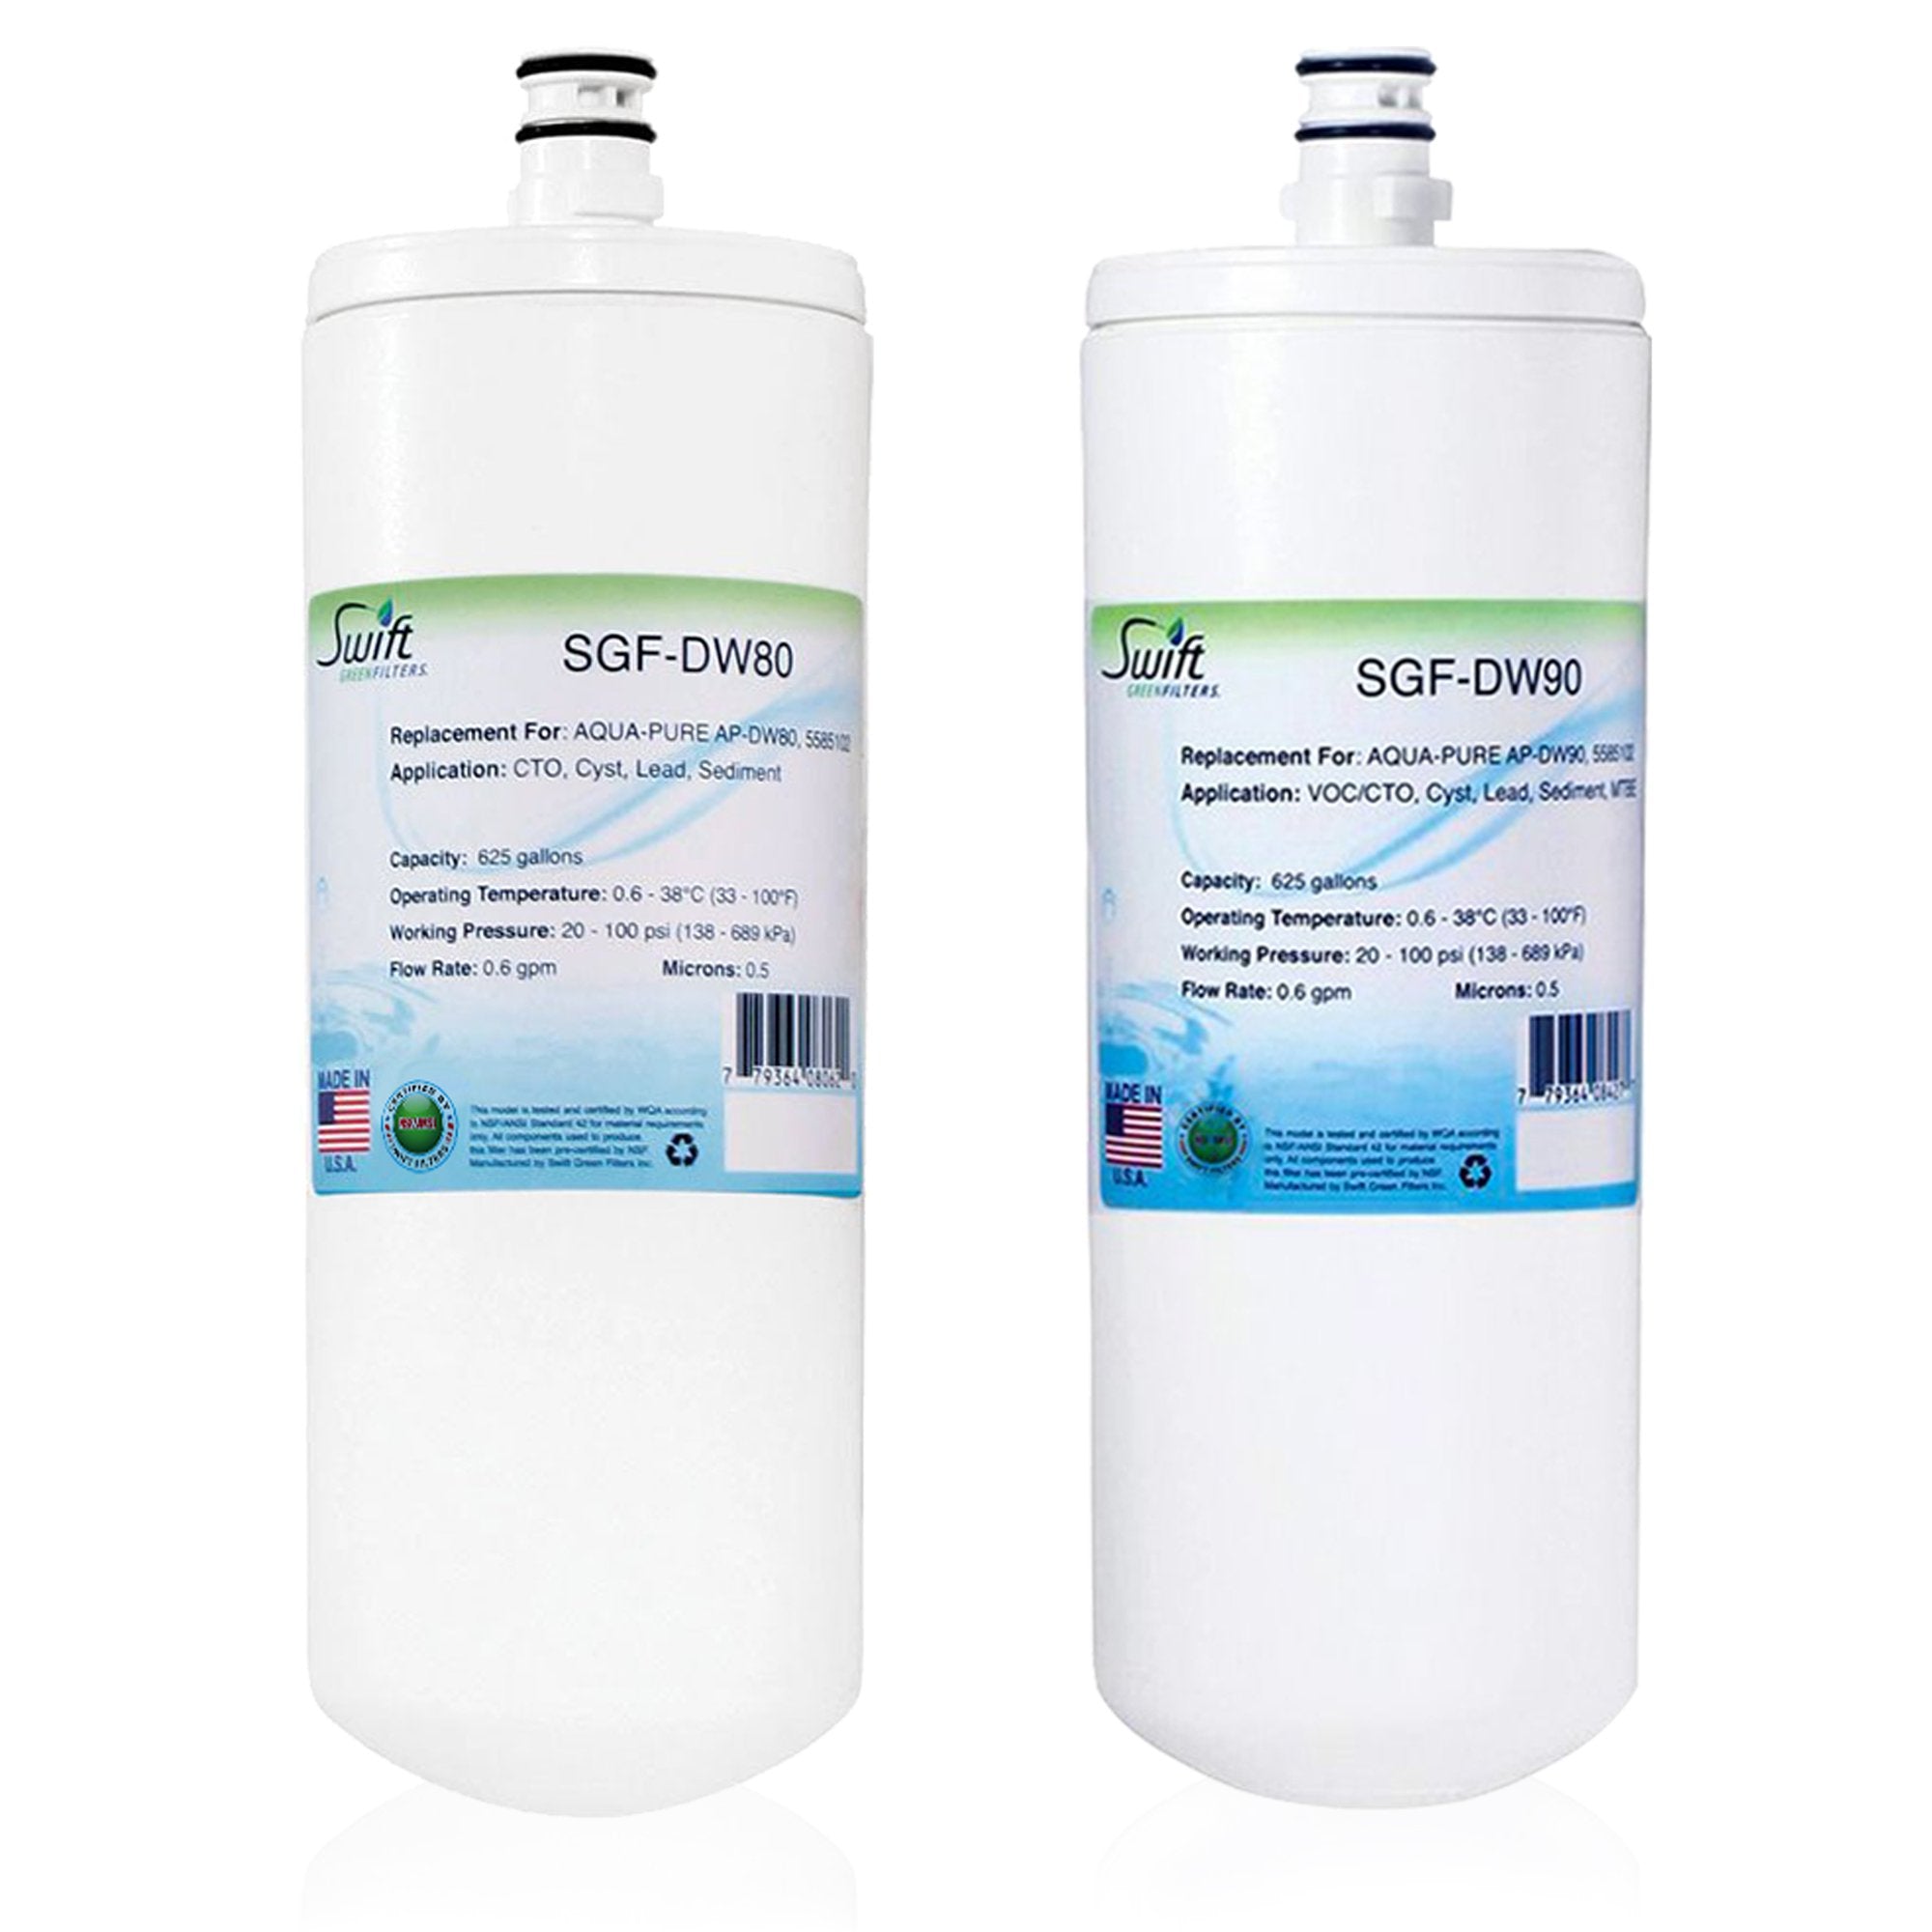 Replacement for 3M Aqua Pure AP-DW80 Filter by Swift Green Filters SGF-DW80 & SGF-DW90 (sell as a set of 2 with DW80)